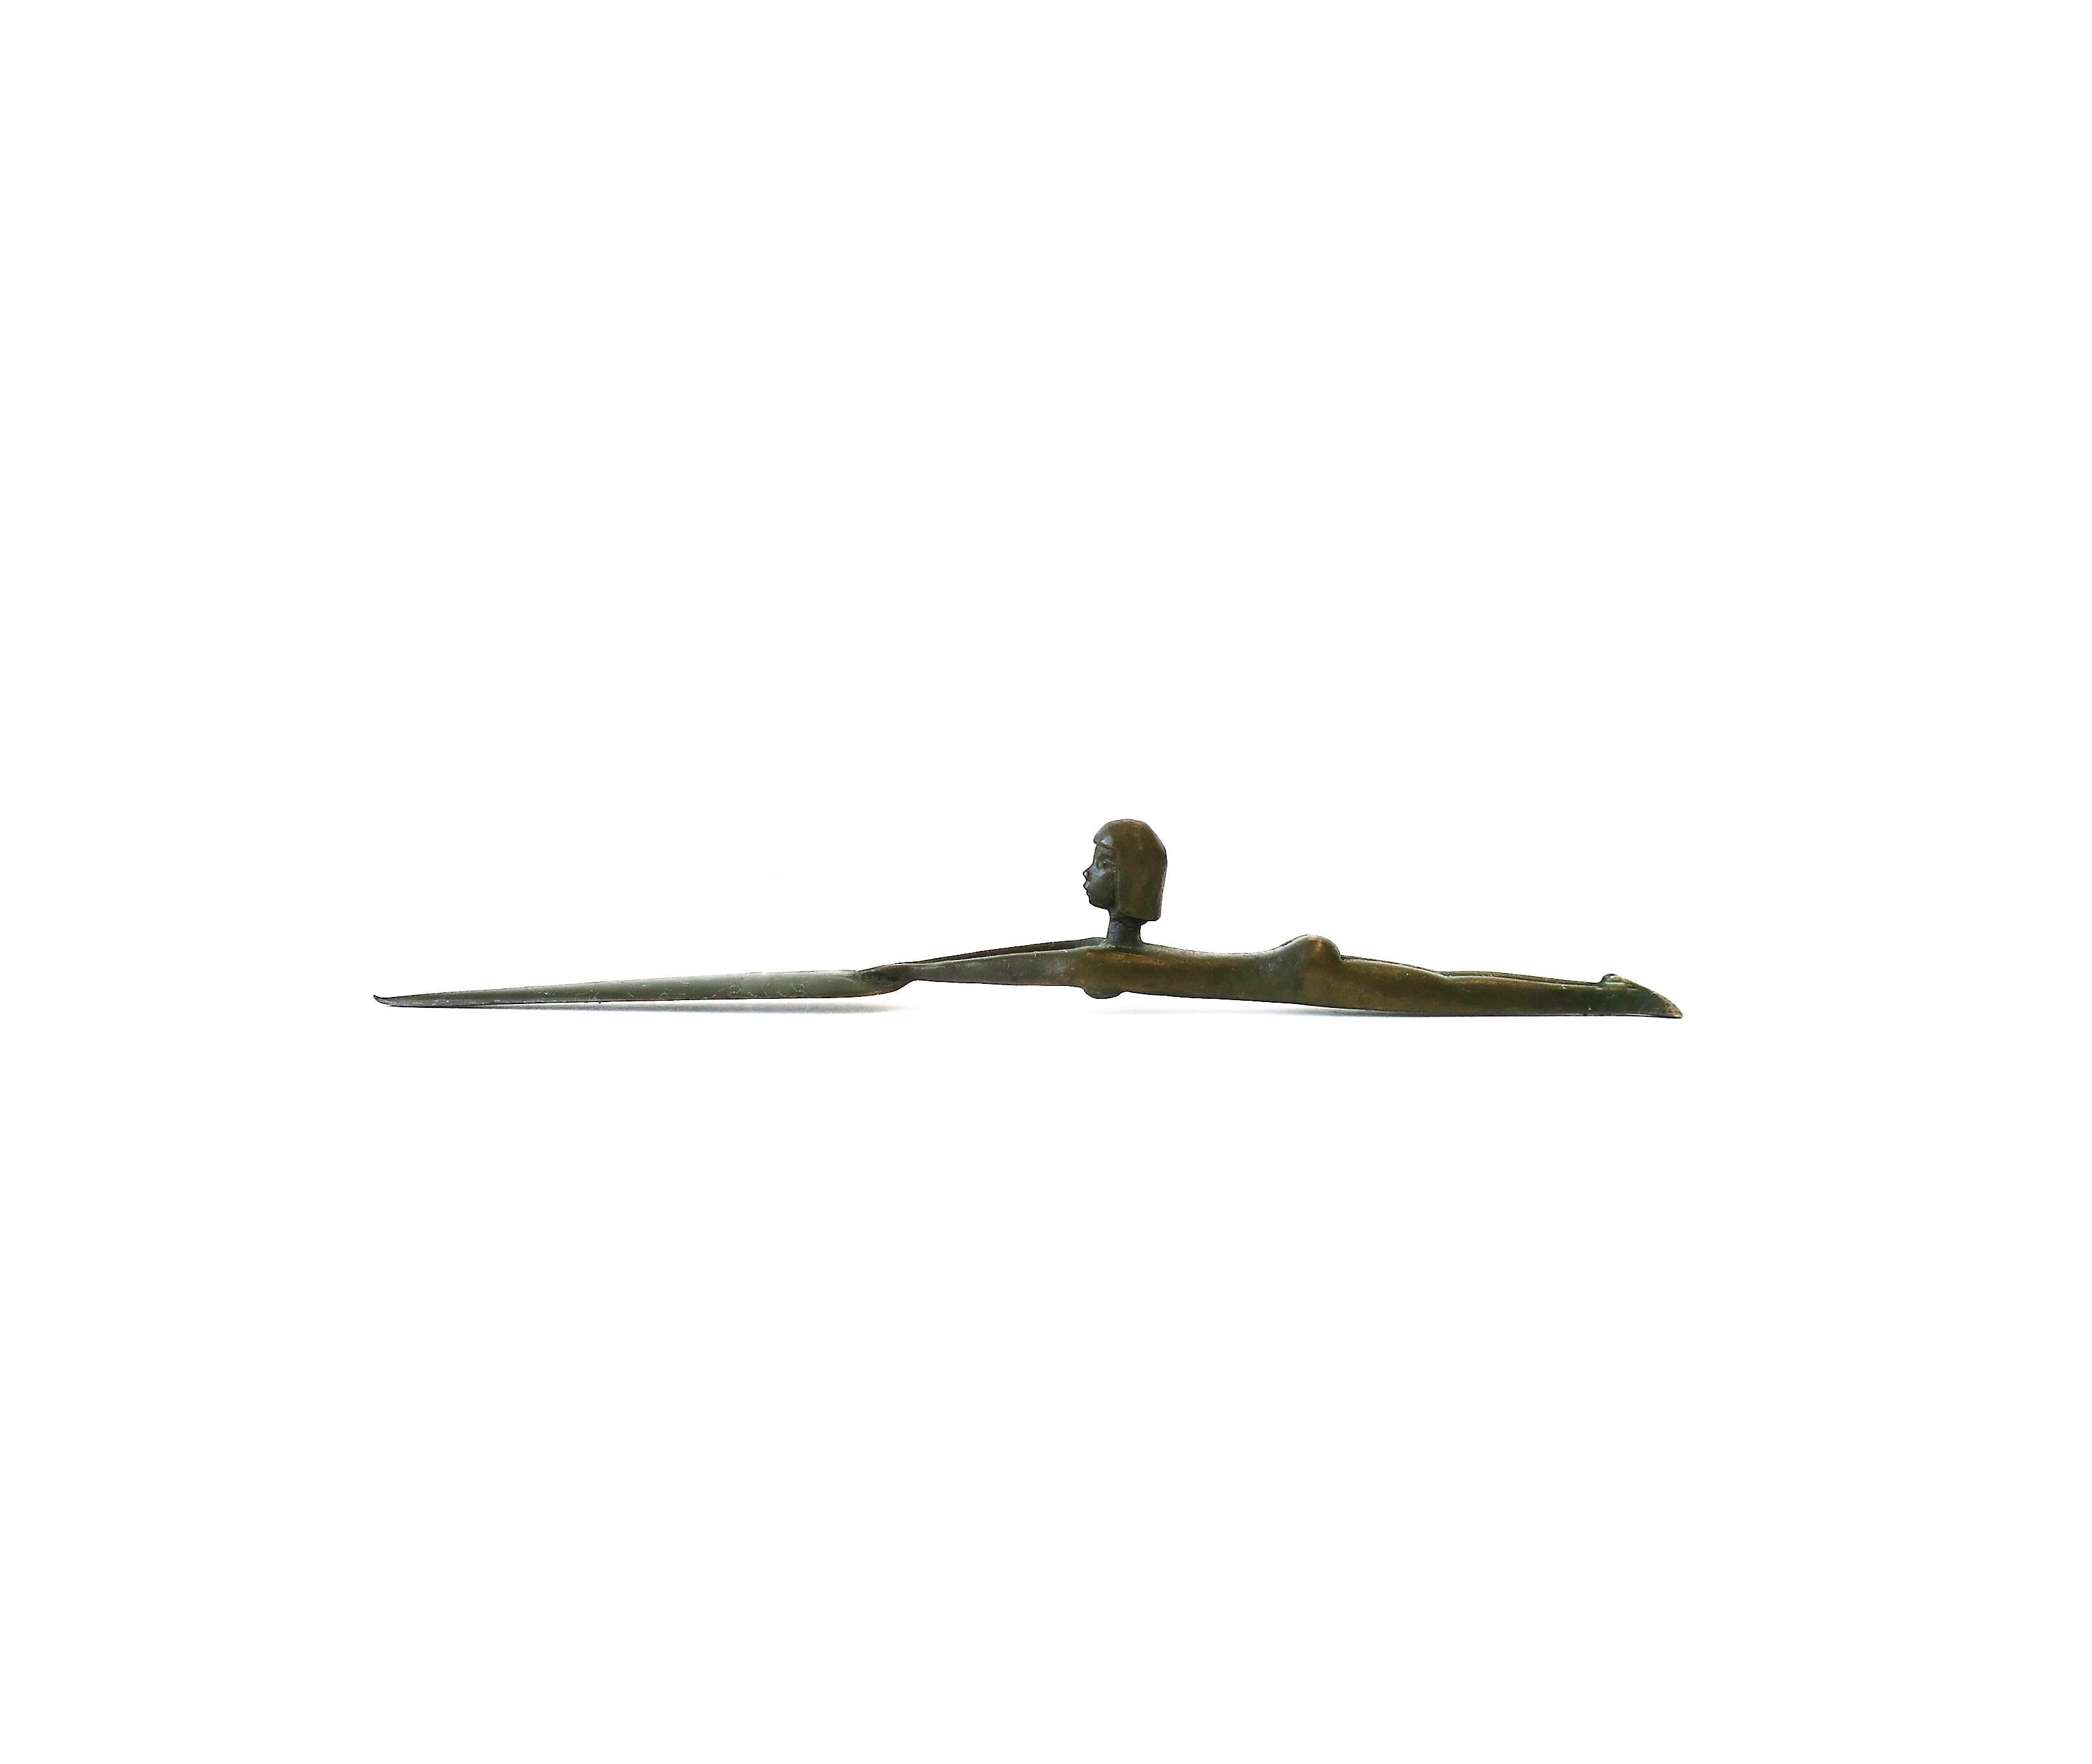 A solid detailed bronze female figurative letter opener; female figure is holding a board or shield. Piece is solid bronze with dark brown finish. Artist initials on underside as show in image #9. A great office/desk accessory. 

Measures: 1.25